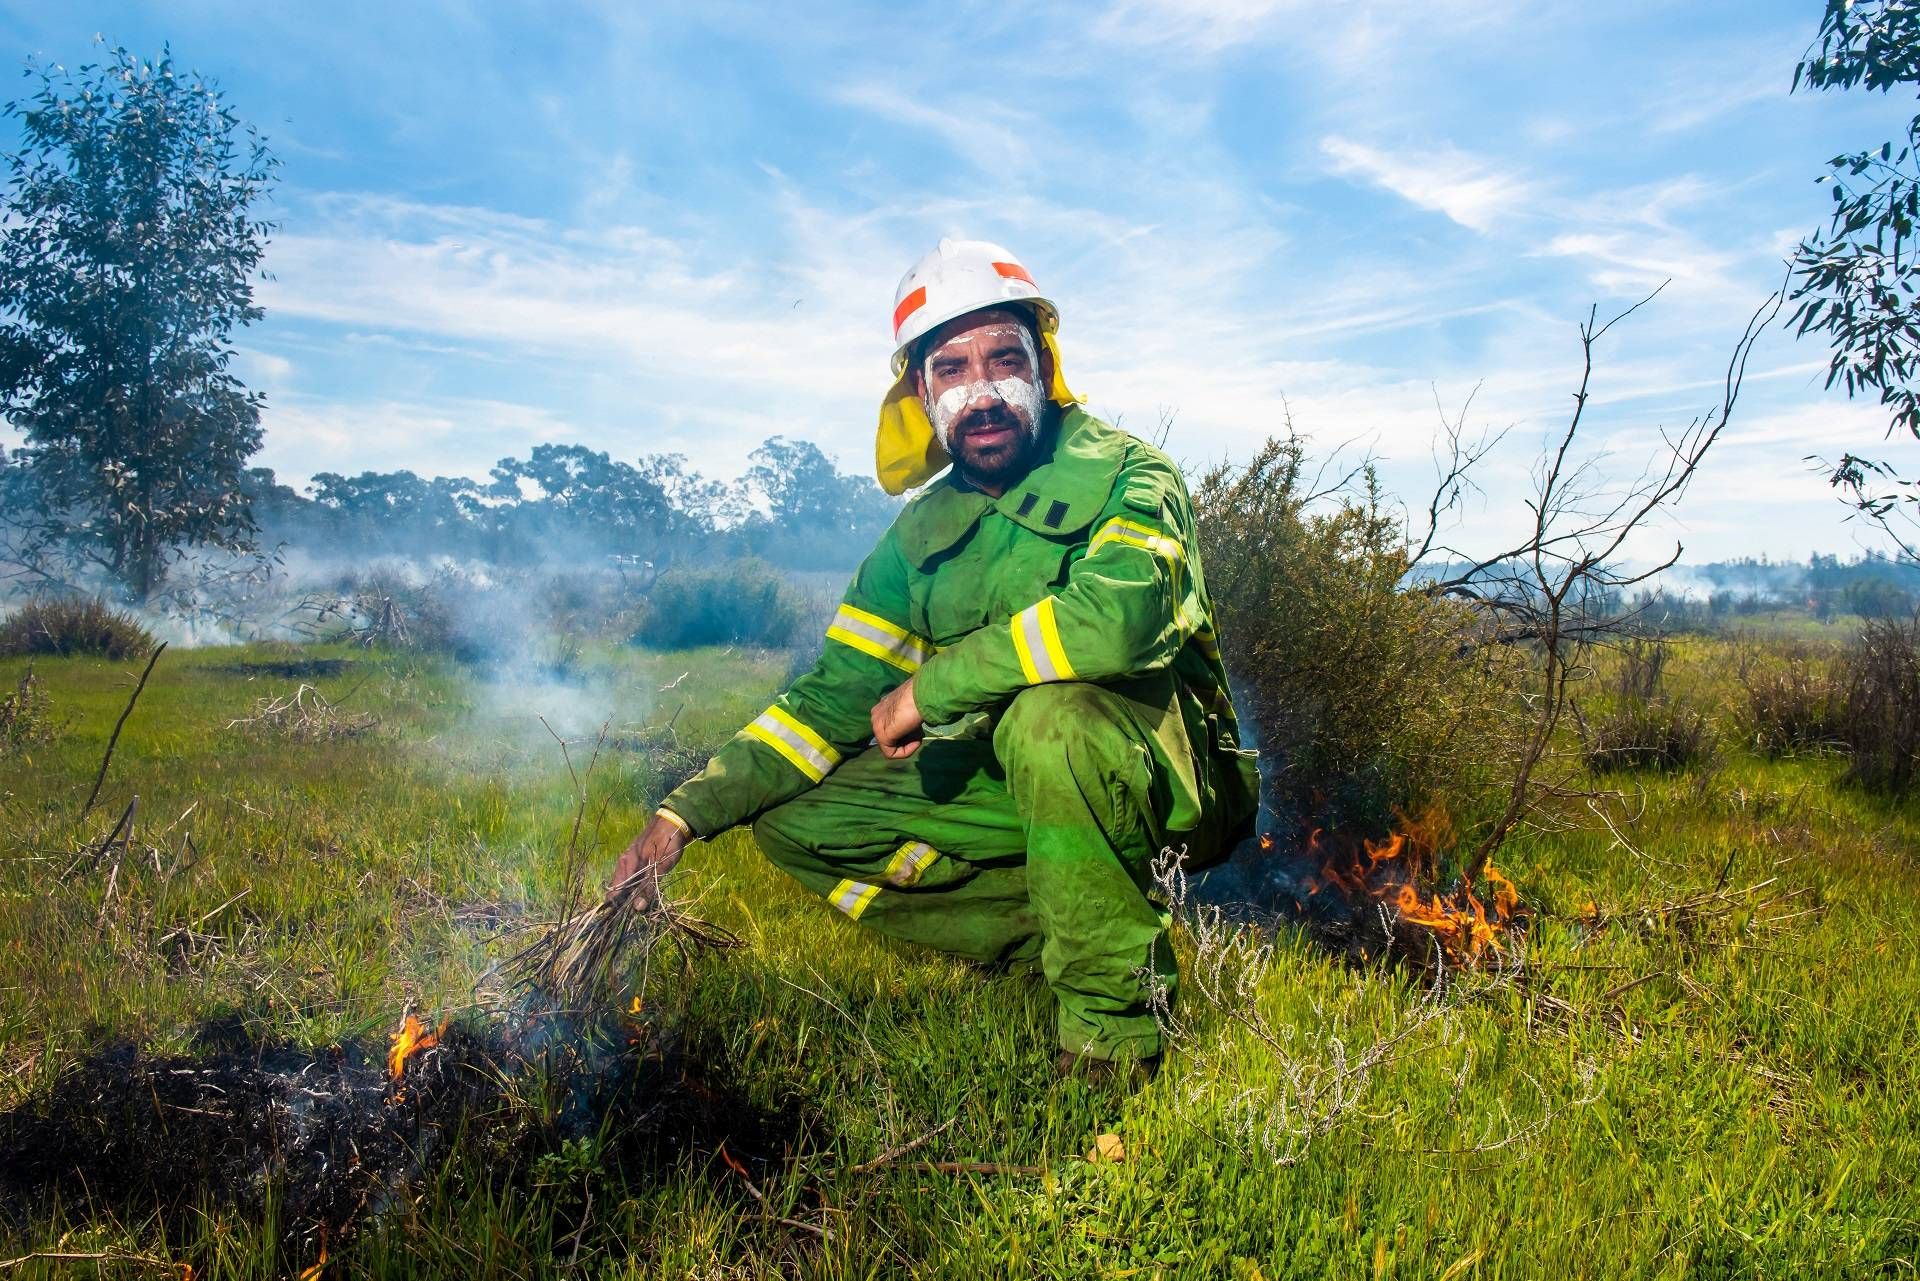 Man wearing a hard hat and green overalls is crouching and looking directly at the camera. In his right hand he is holding dried grasses which he is using to ignite a Cultural Burn. Behind him is smoke and flames.